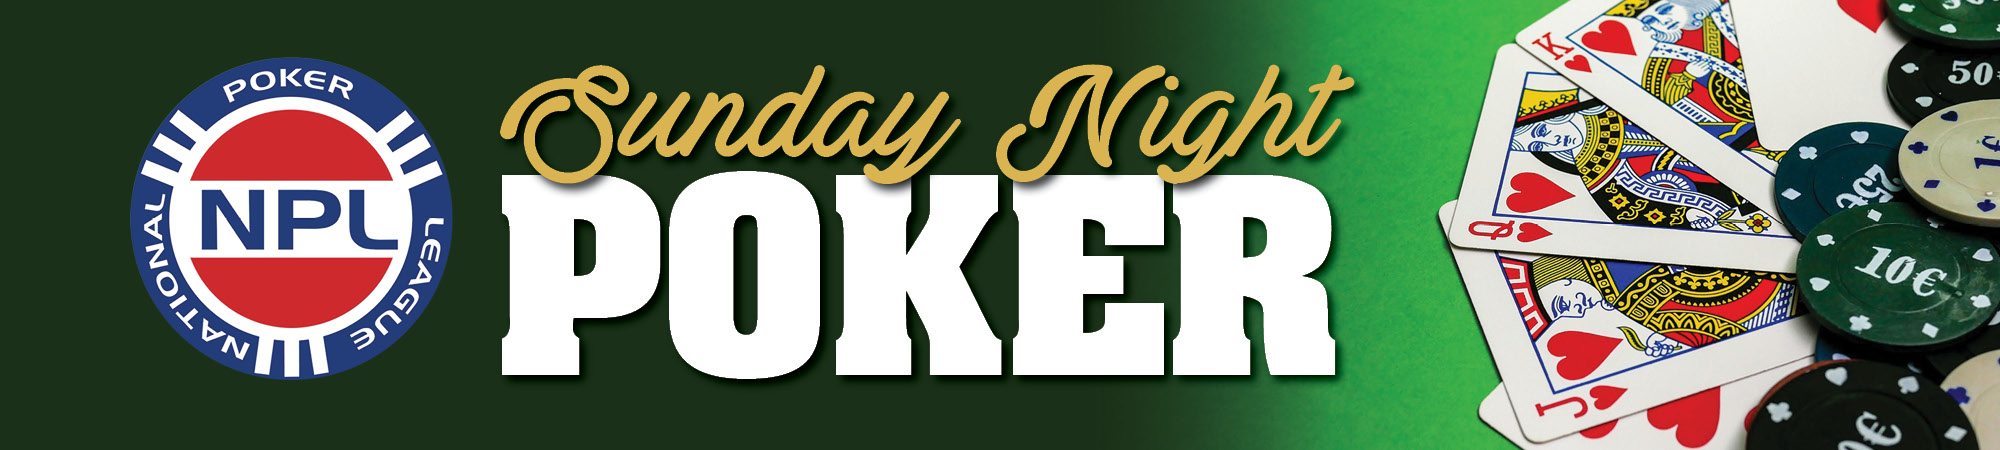 Come join NPL Sunday night poker at Guildford Leagues! Starts at 7.30pm with a guaranteed $1,000 in prize money. Don't miss out on the action!